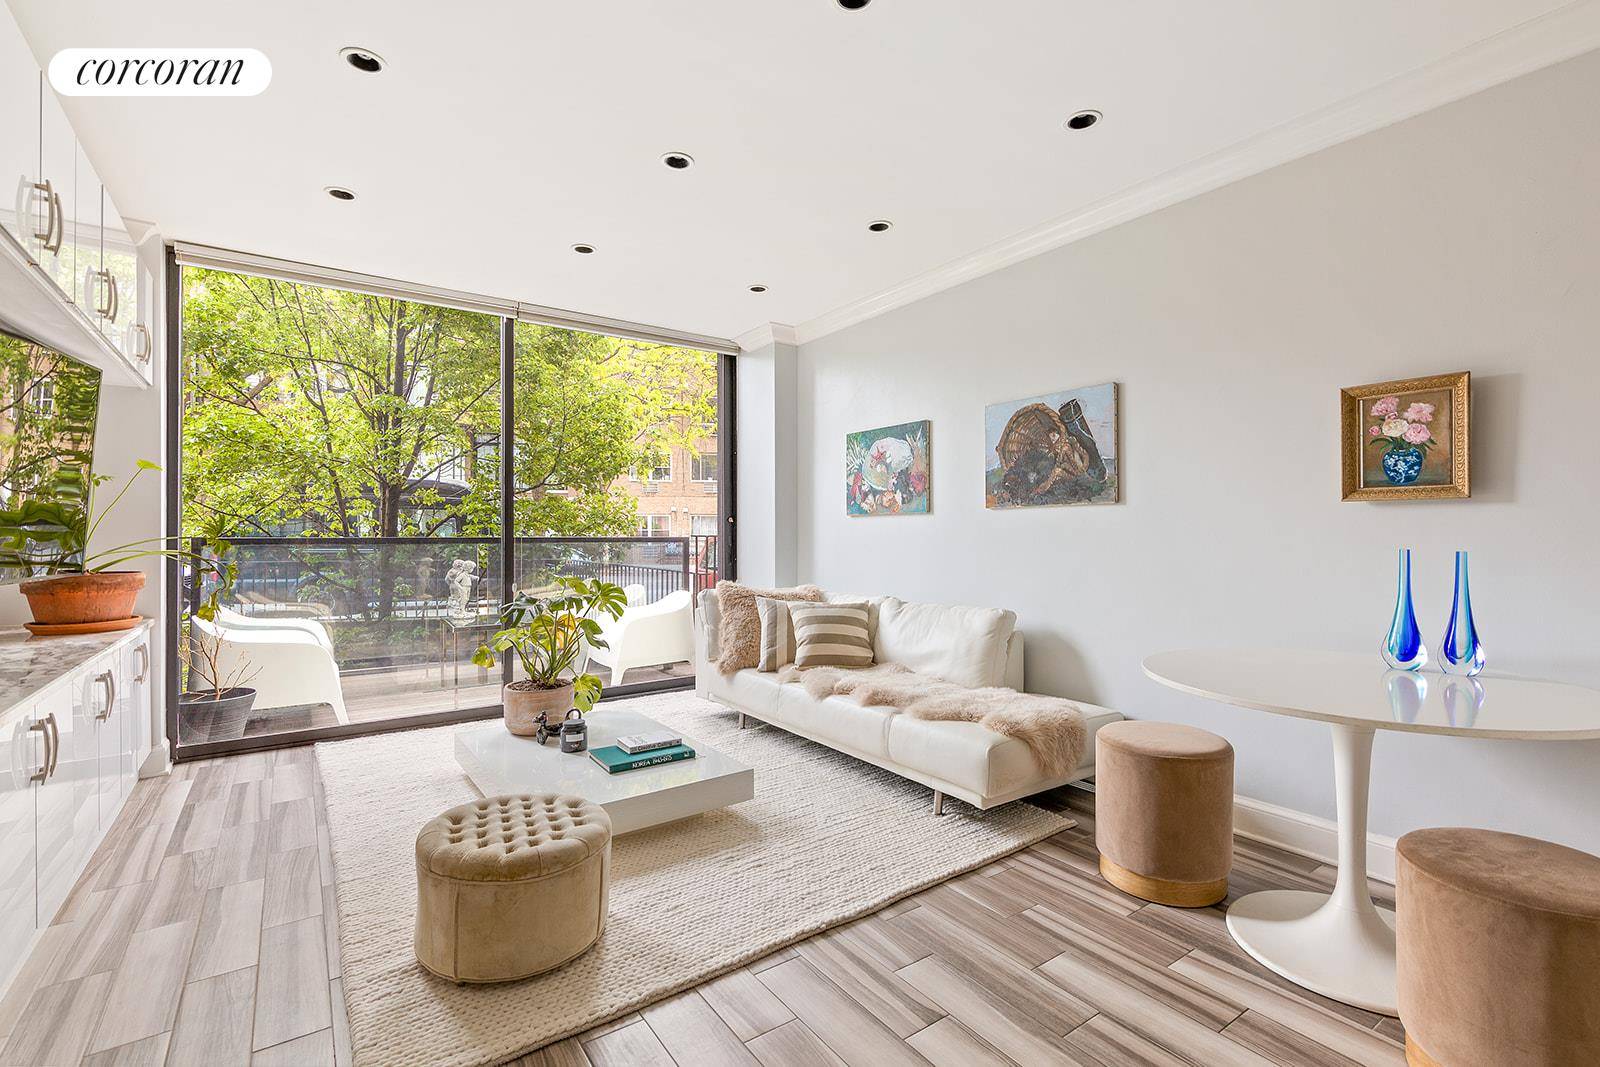 This gem of a duplex in Williamsburg is indeed a rare find.